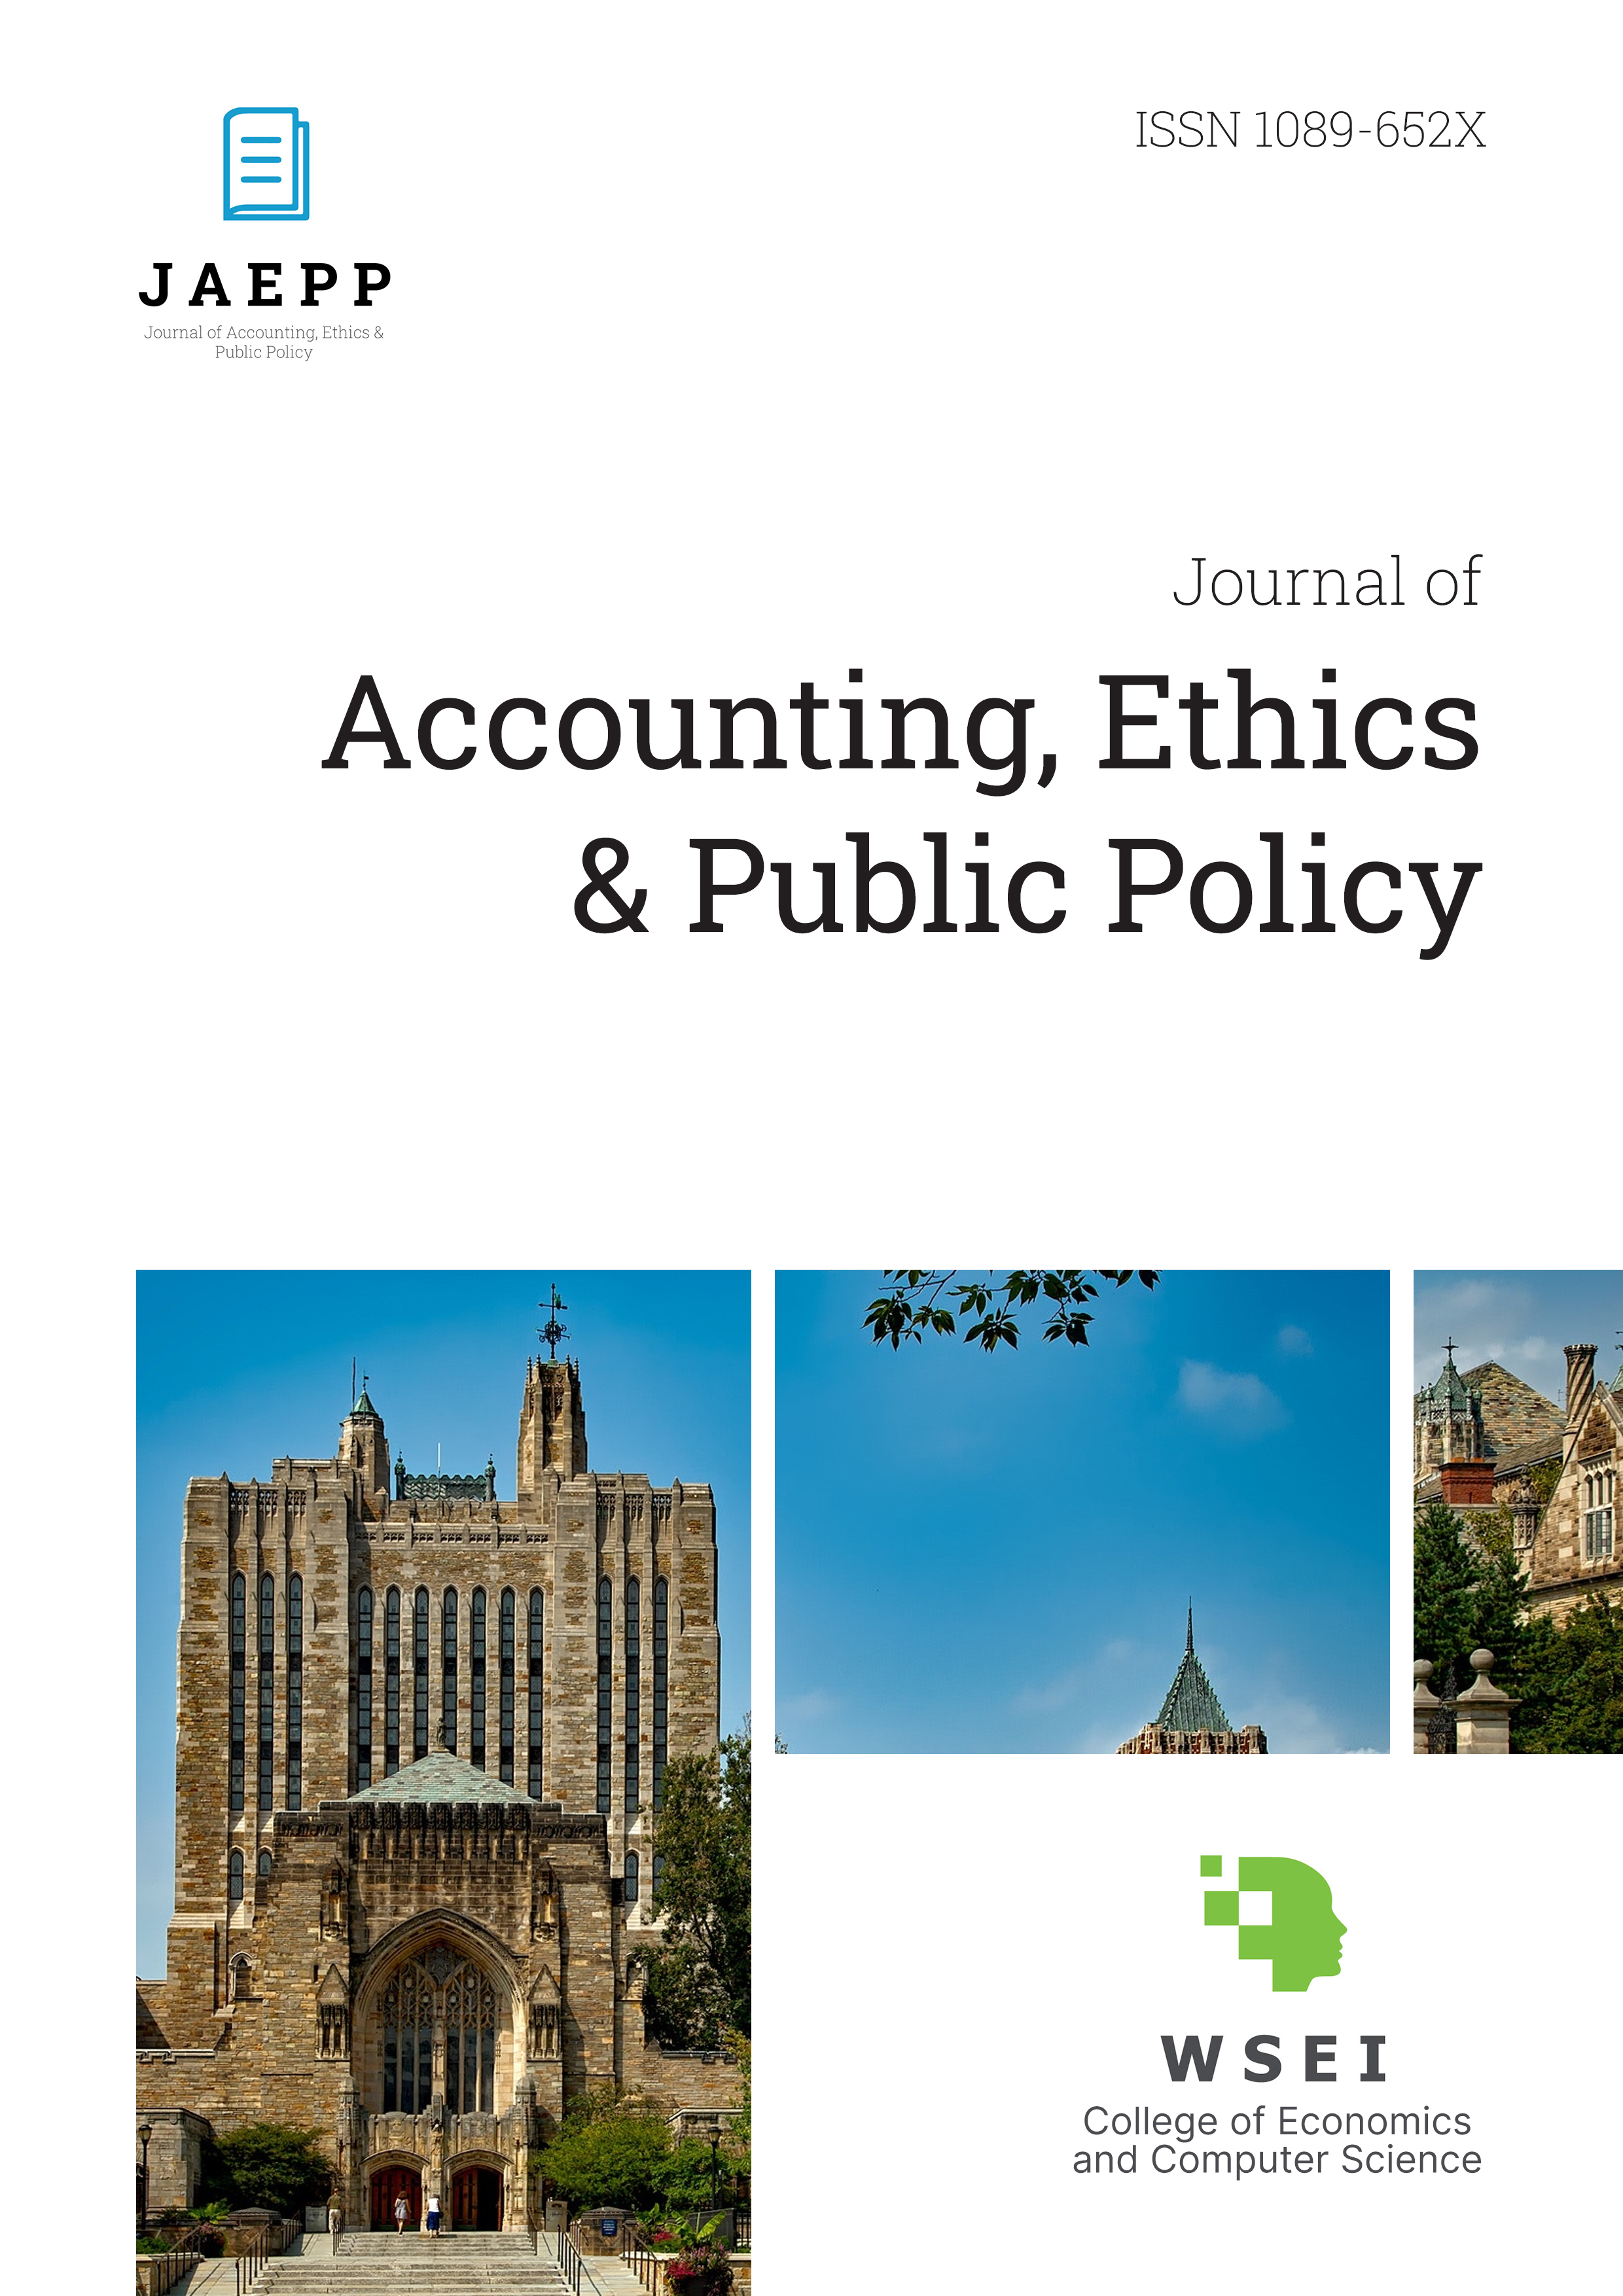 					View Vol. 20 No. 4 (2019): Journal of Accounting, Ethics & Public Policy, JAEPP
				